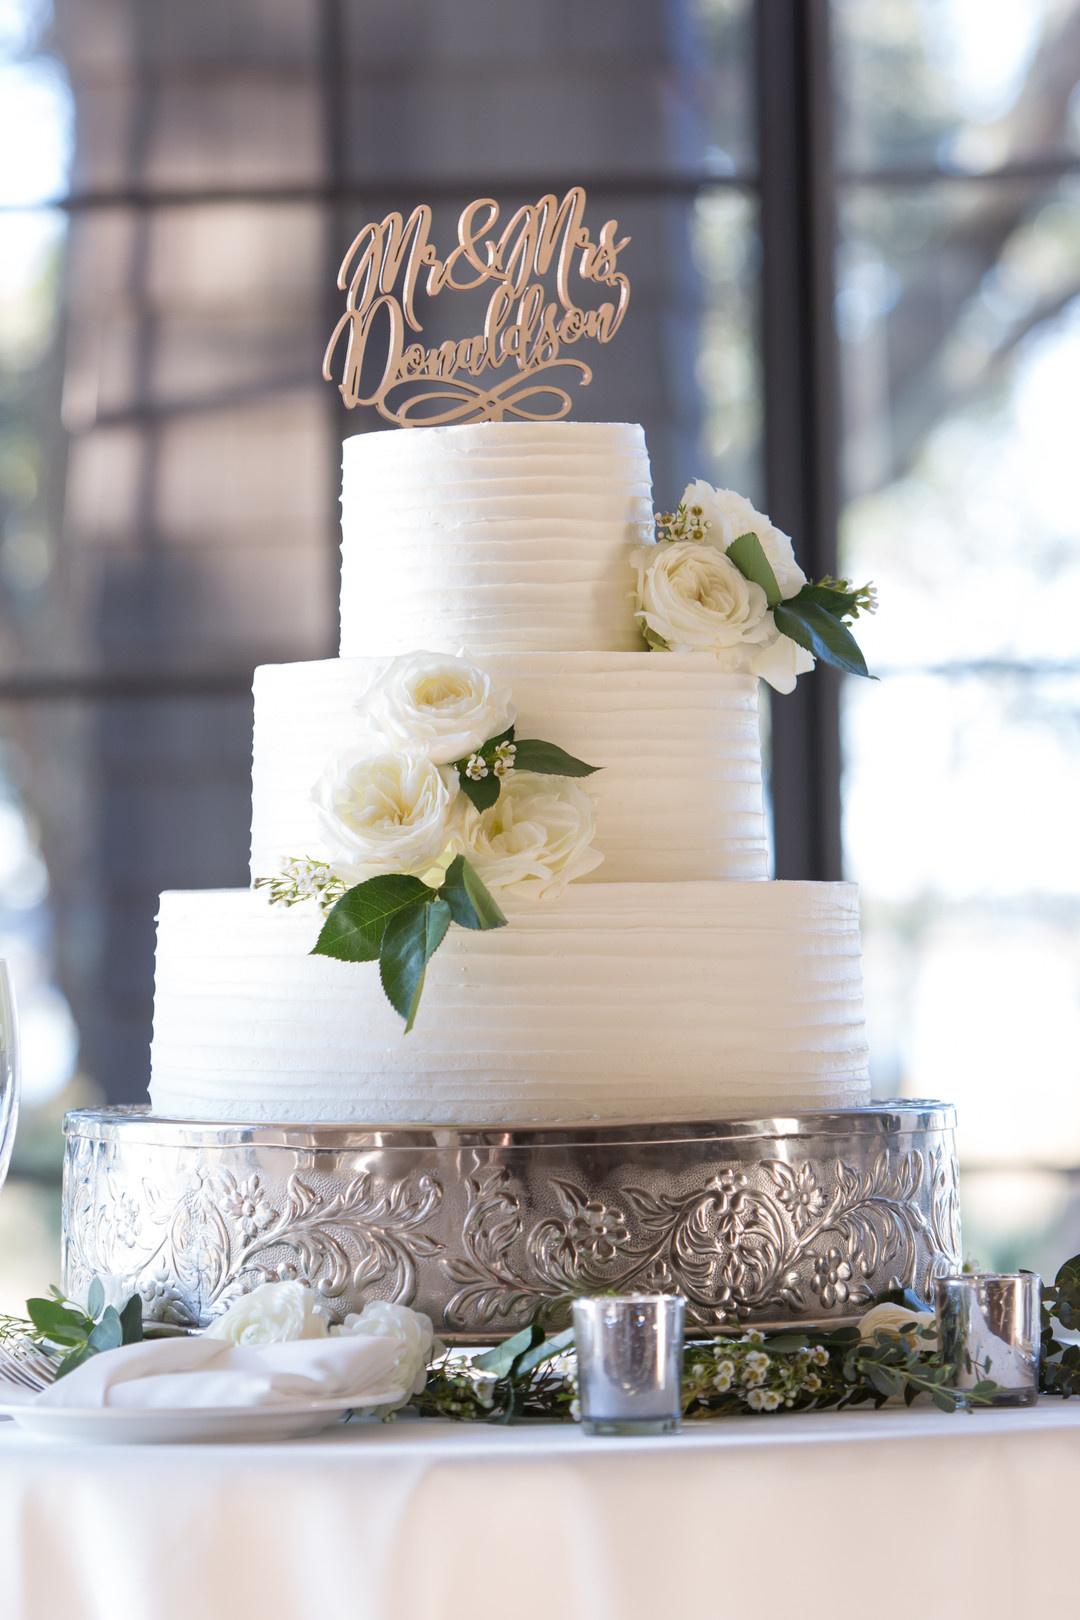 How To Make Your Own Wedding Cake - Chelsweets